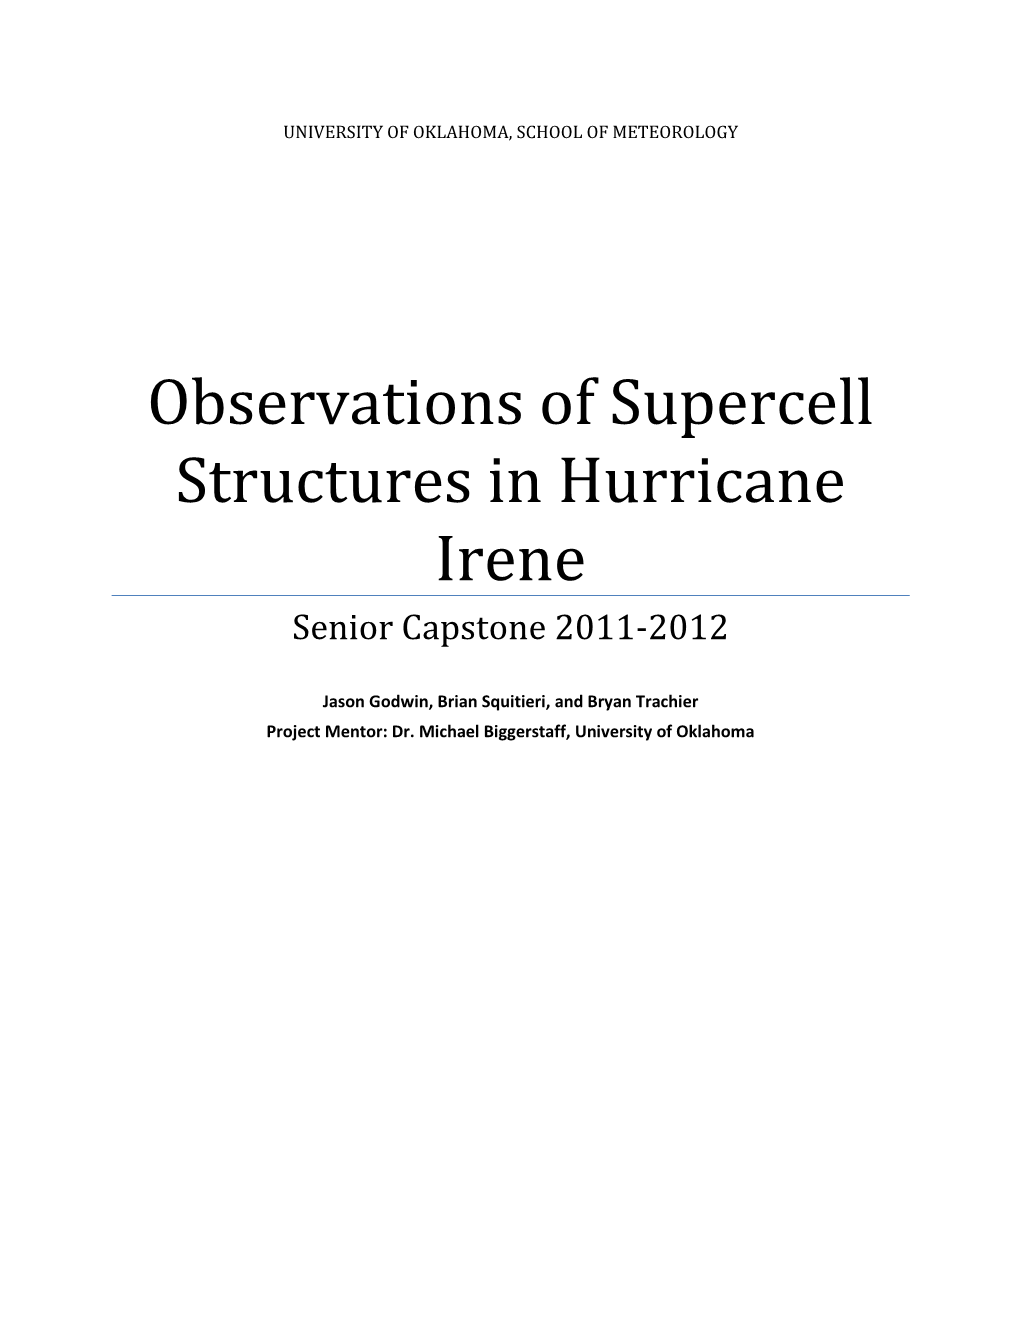 Observations of Supercell Structures in Hurricane Irene Senior Capstone 2011-2012